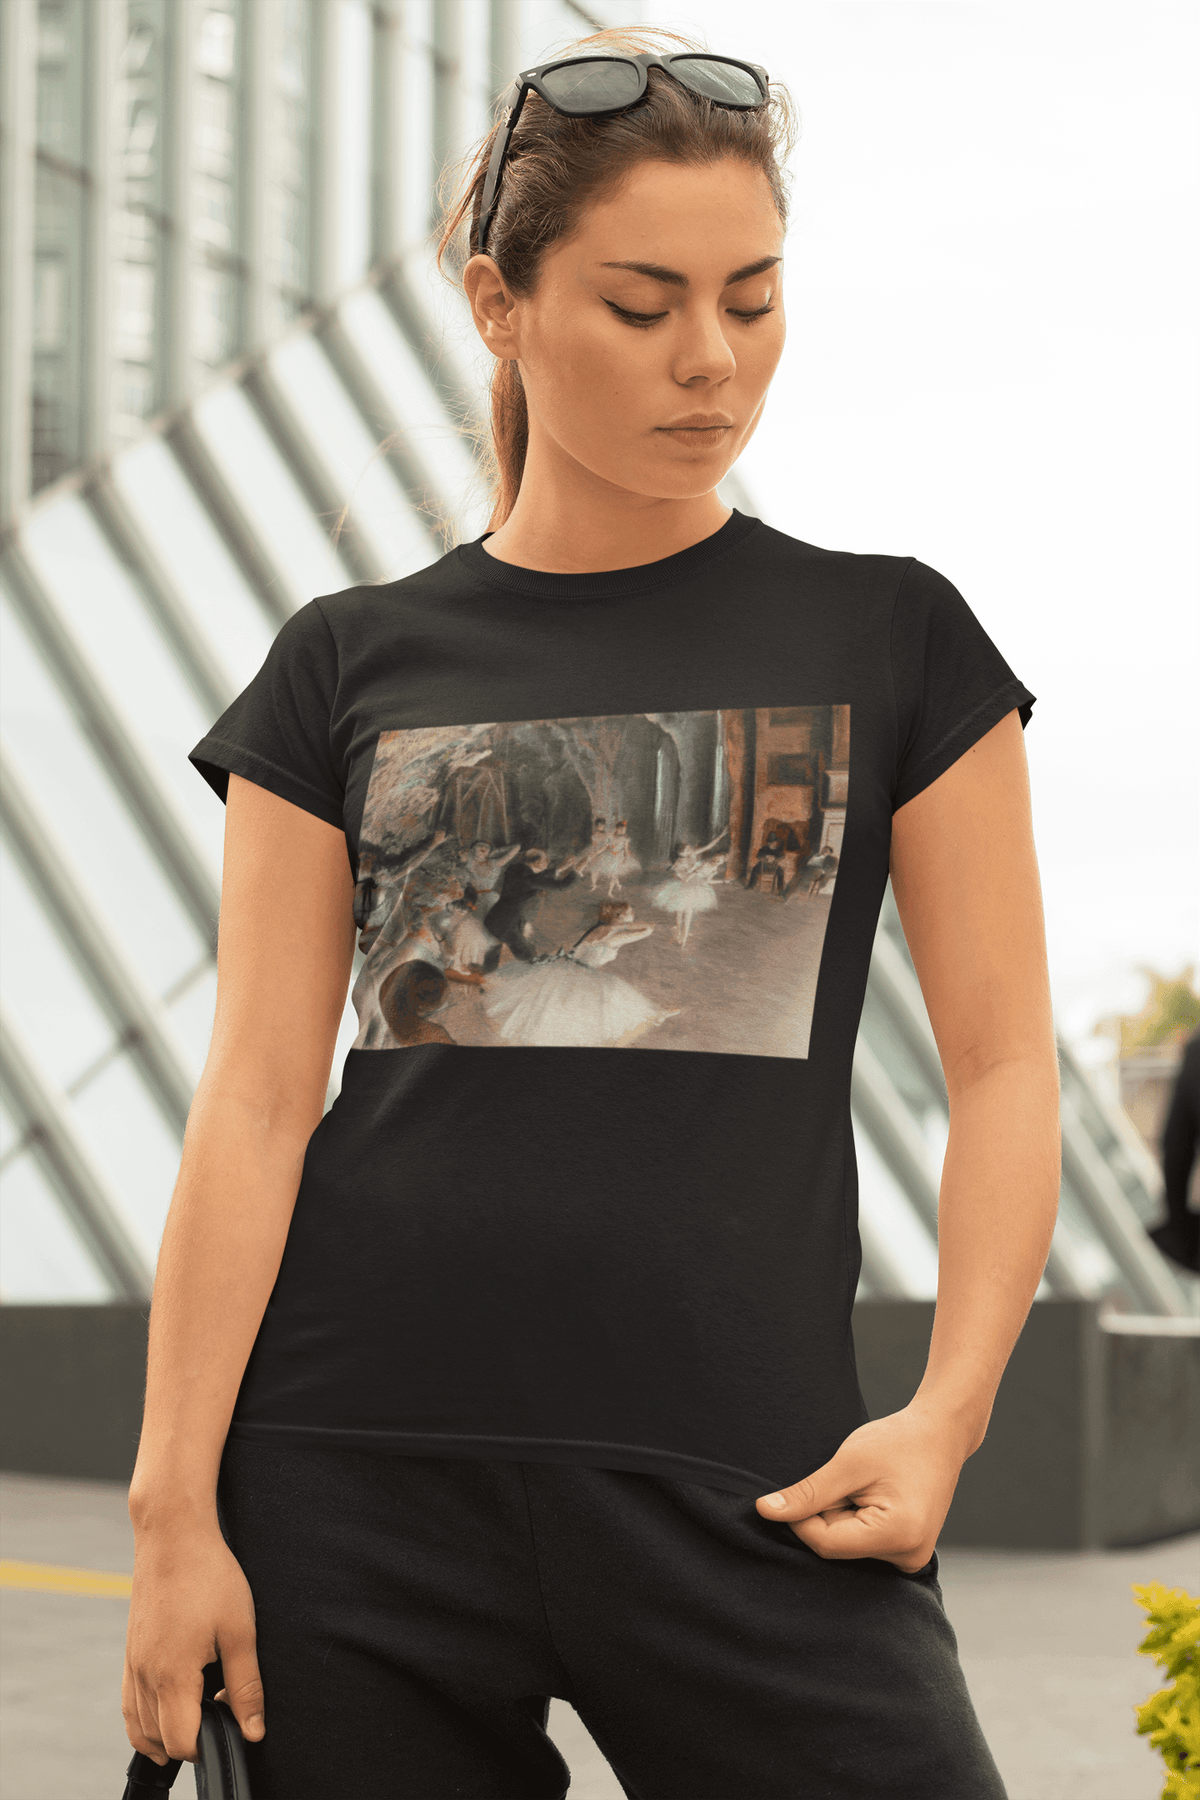 The Rehearsal Onstage T-shirt - StylinArt